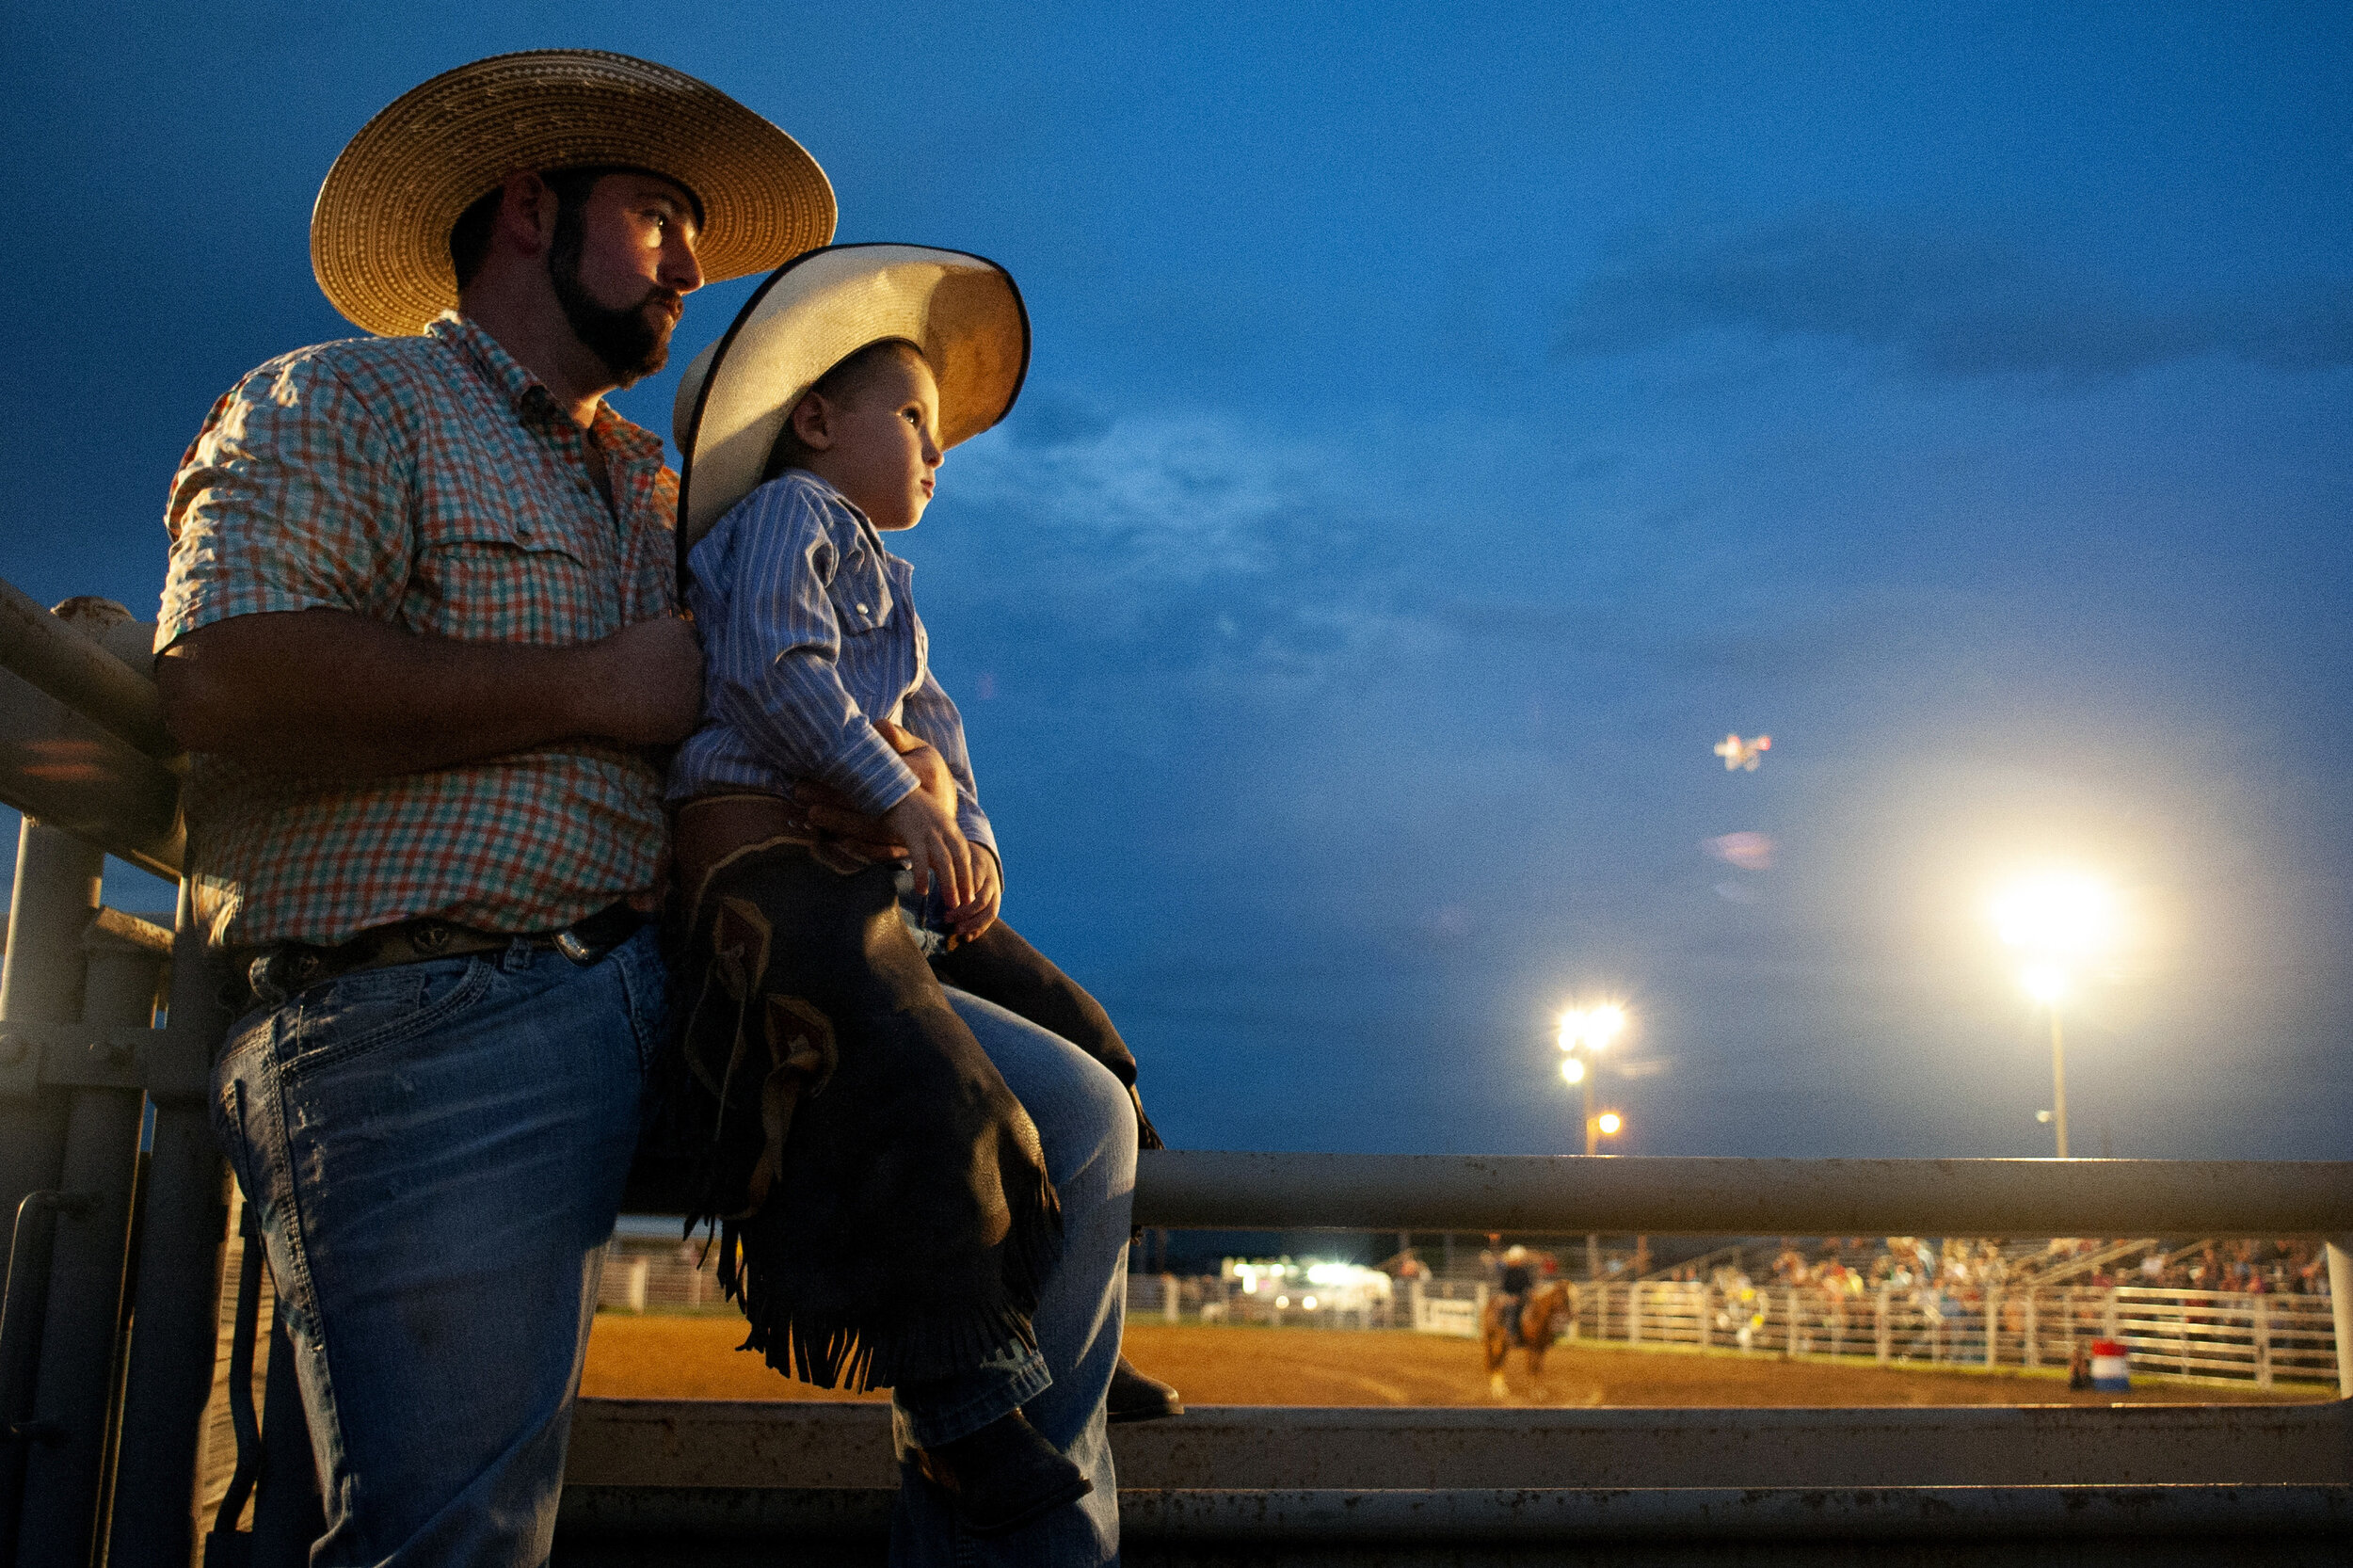  Chase McClelland, of Cardwell, Missouri, and his cousin Elliot Smith, 4, of Arbyrd, Missouri, sit atop a chute during the bull riding portion of the Greene County Fair's rodeo Sept. 6 in Paragould, Arkansas. McClelland said his cousin came to the ro